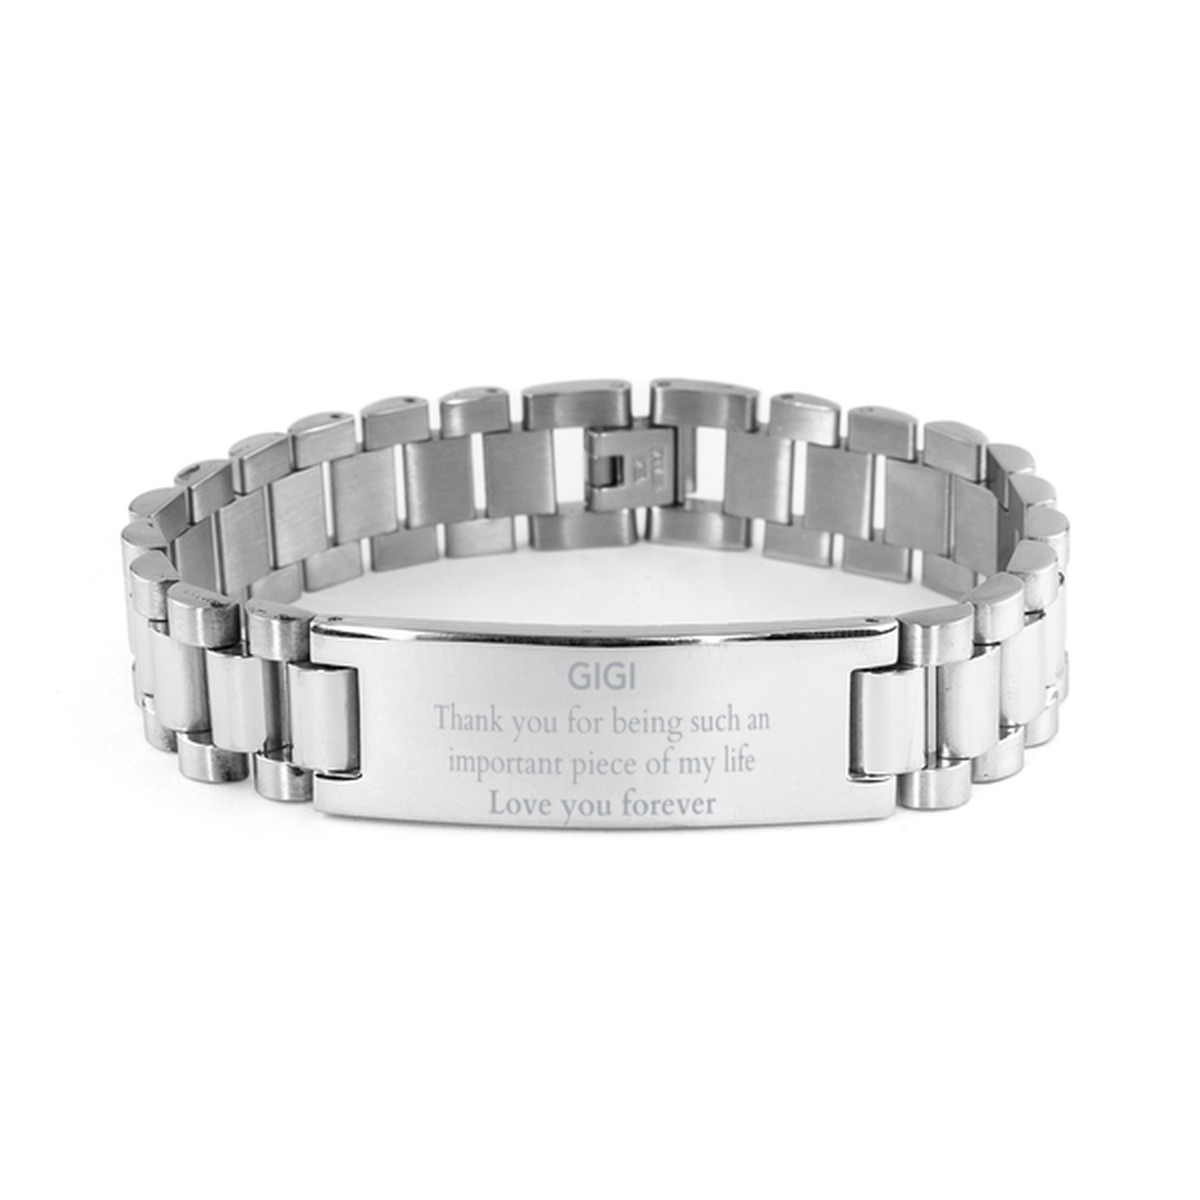 Appropriate Gigi Ladder Stainless Steel Bracelet Epic Birthday Gifts for Gigi Thank you for being such an important piece of my life Gigi Christmas Mothers Fathers Day